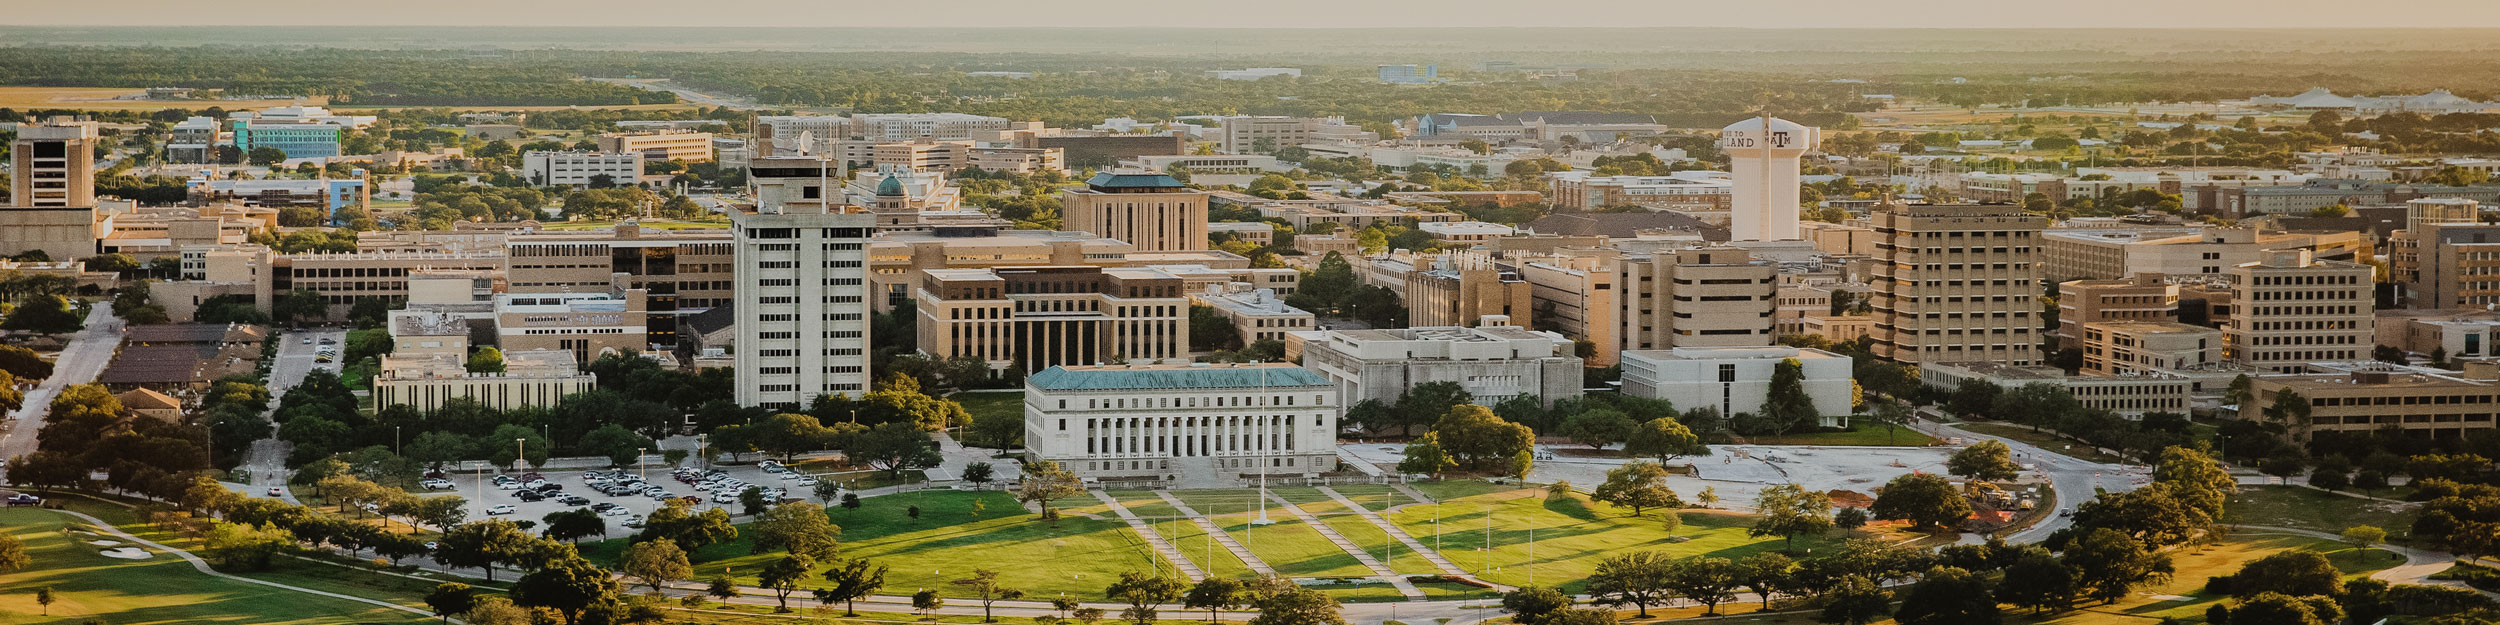 An aerial view of the Texas A&M University campus